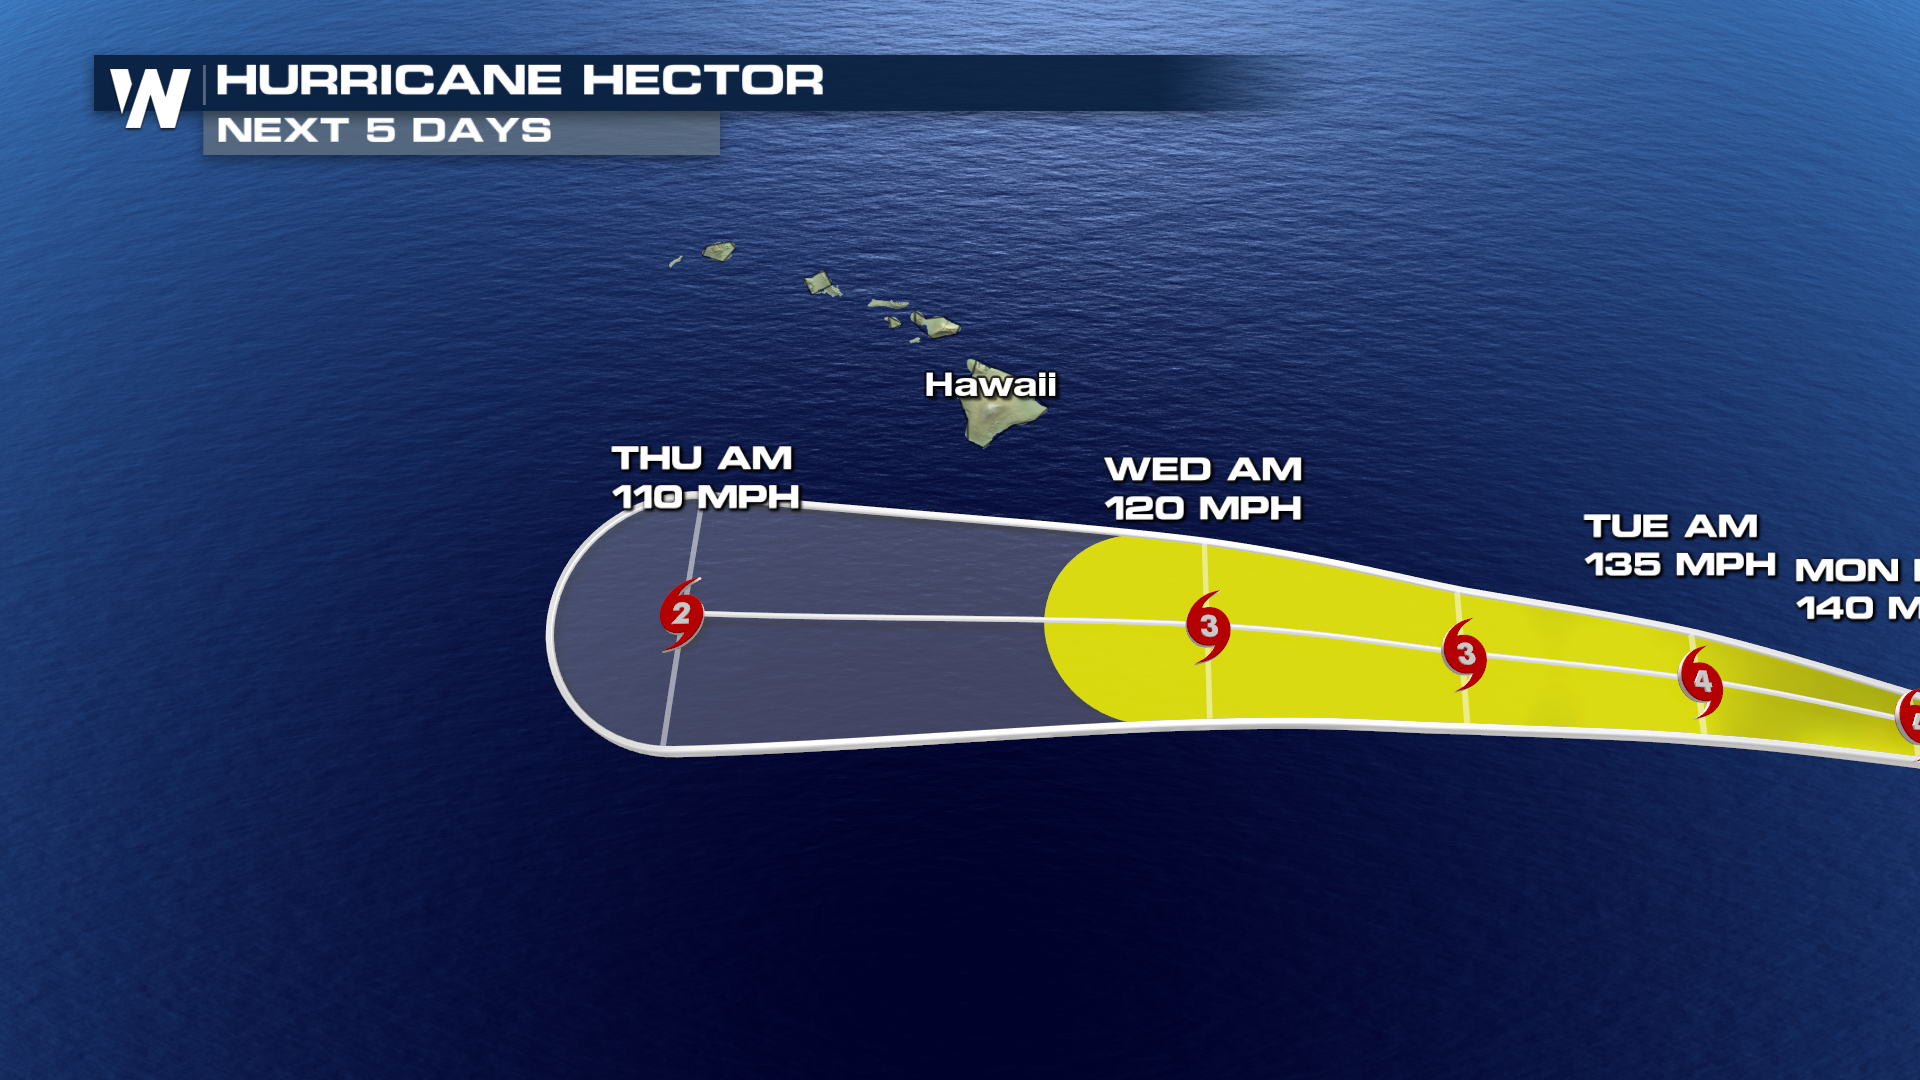 A Look at Possible Impacts for Hawaii From Hector